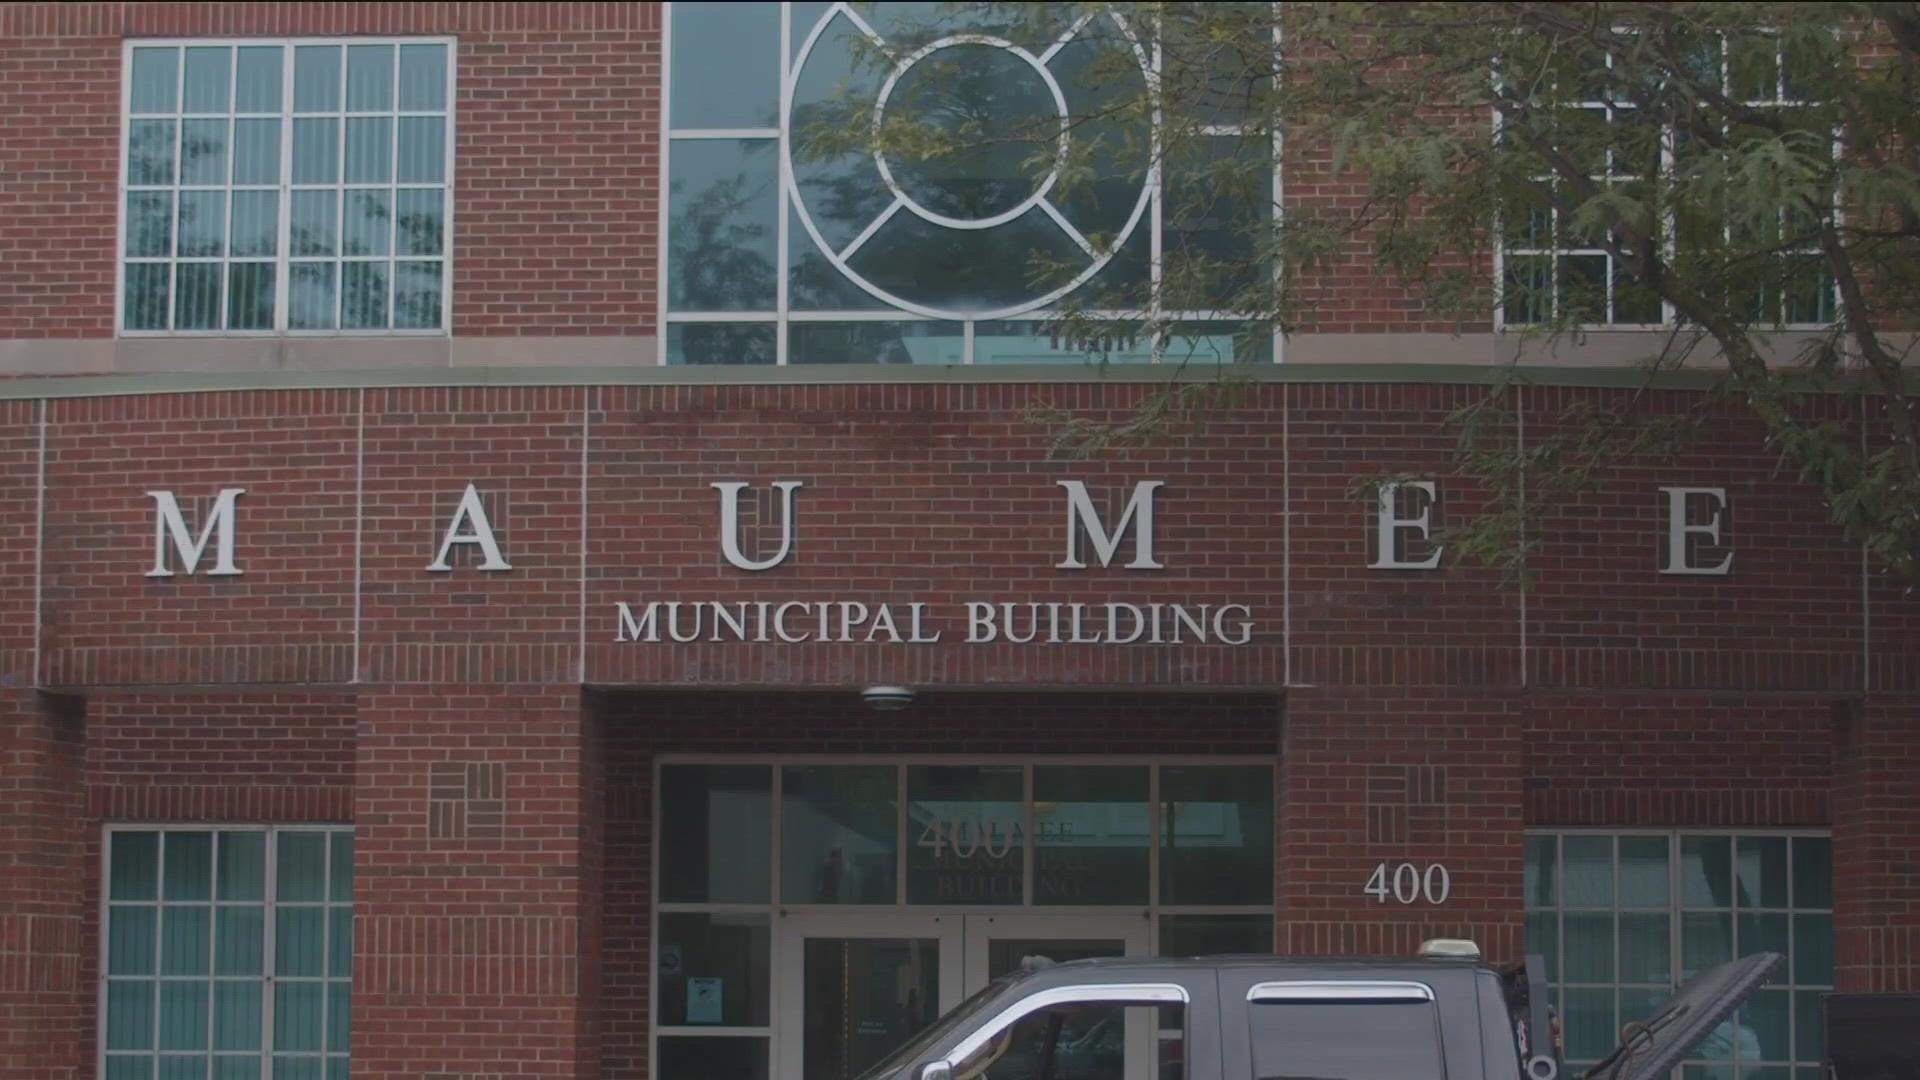 The county responded Wednesday to Maumee's lawsuit over a more than $1 million water bill by saying the bills were erroneous.